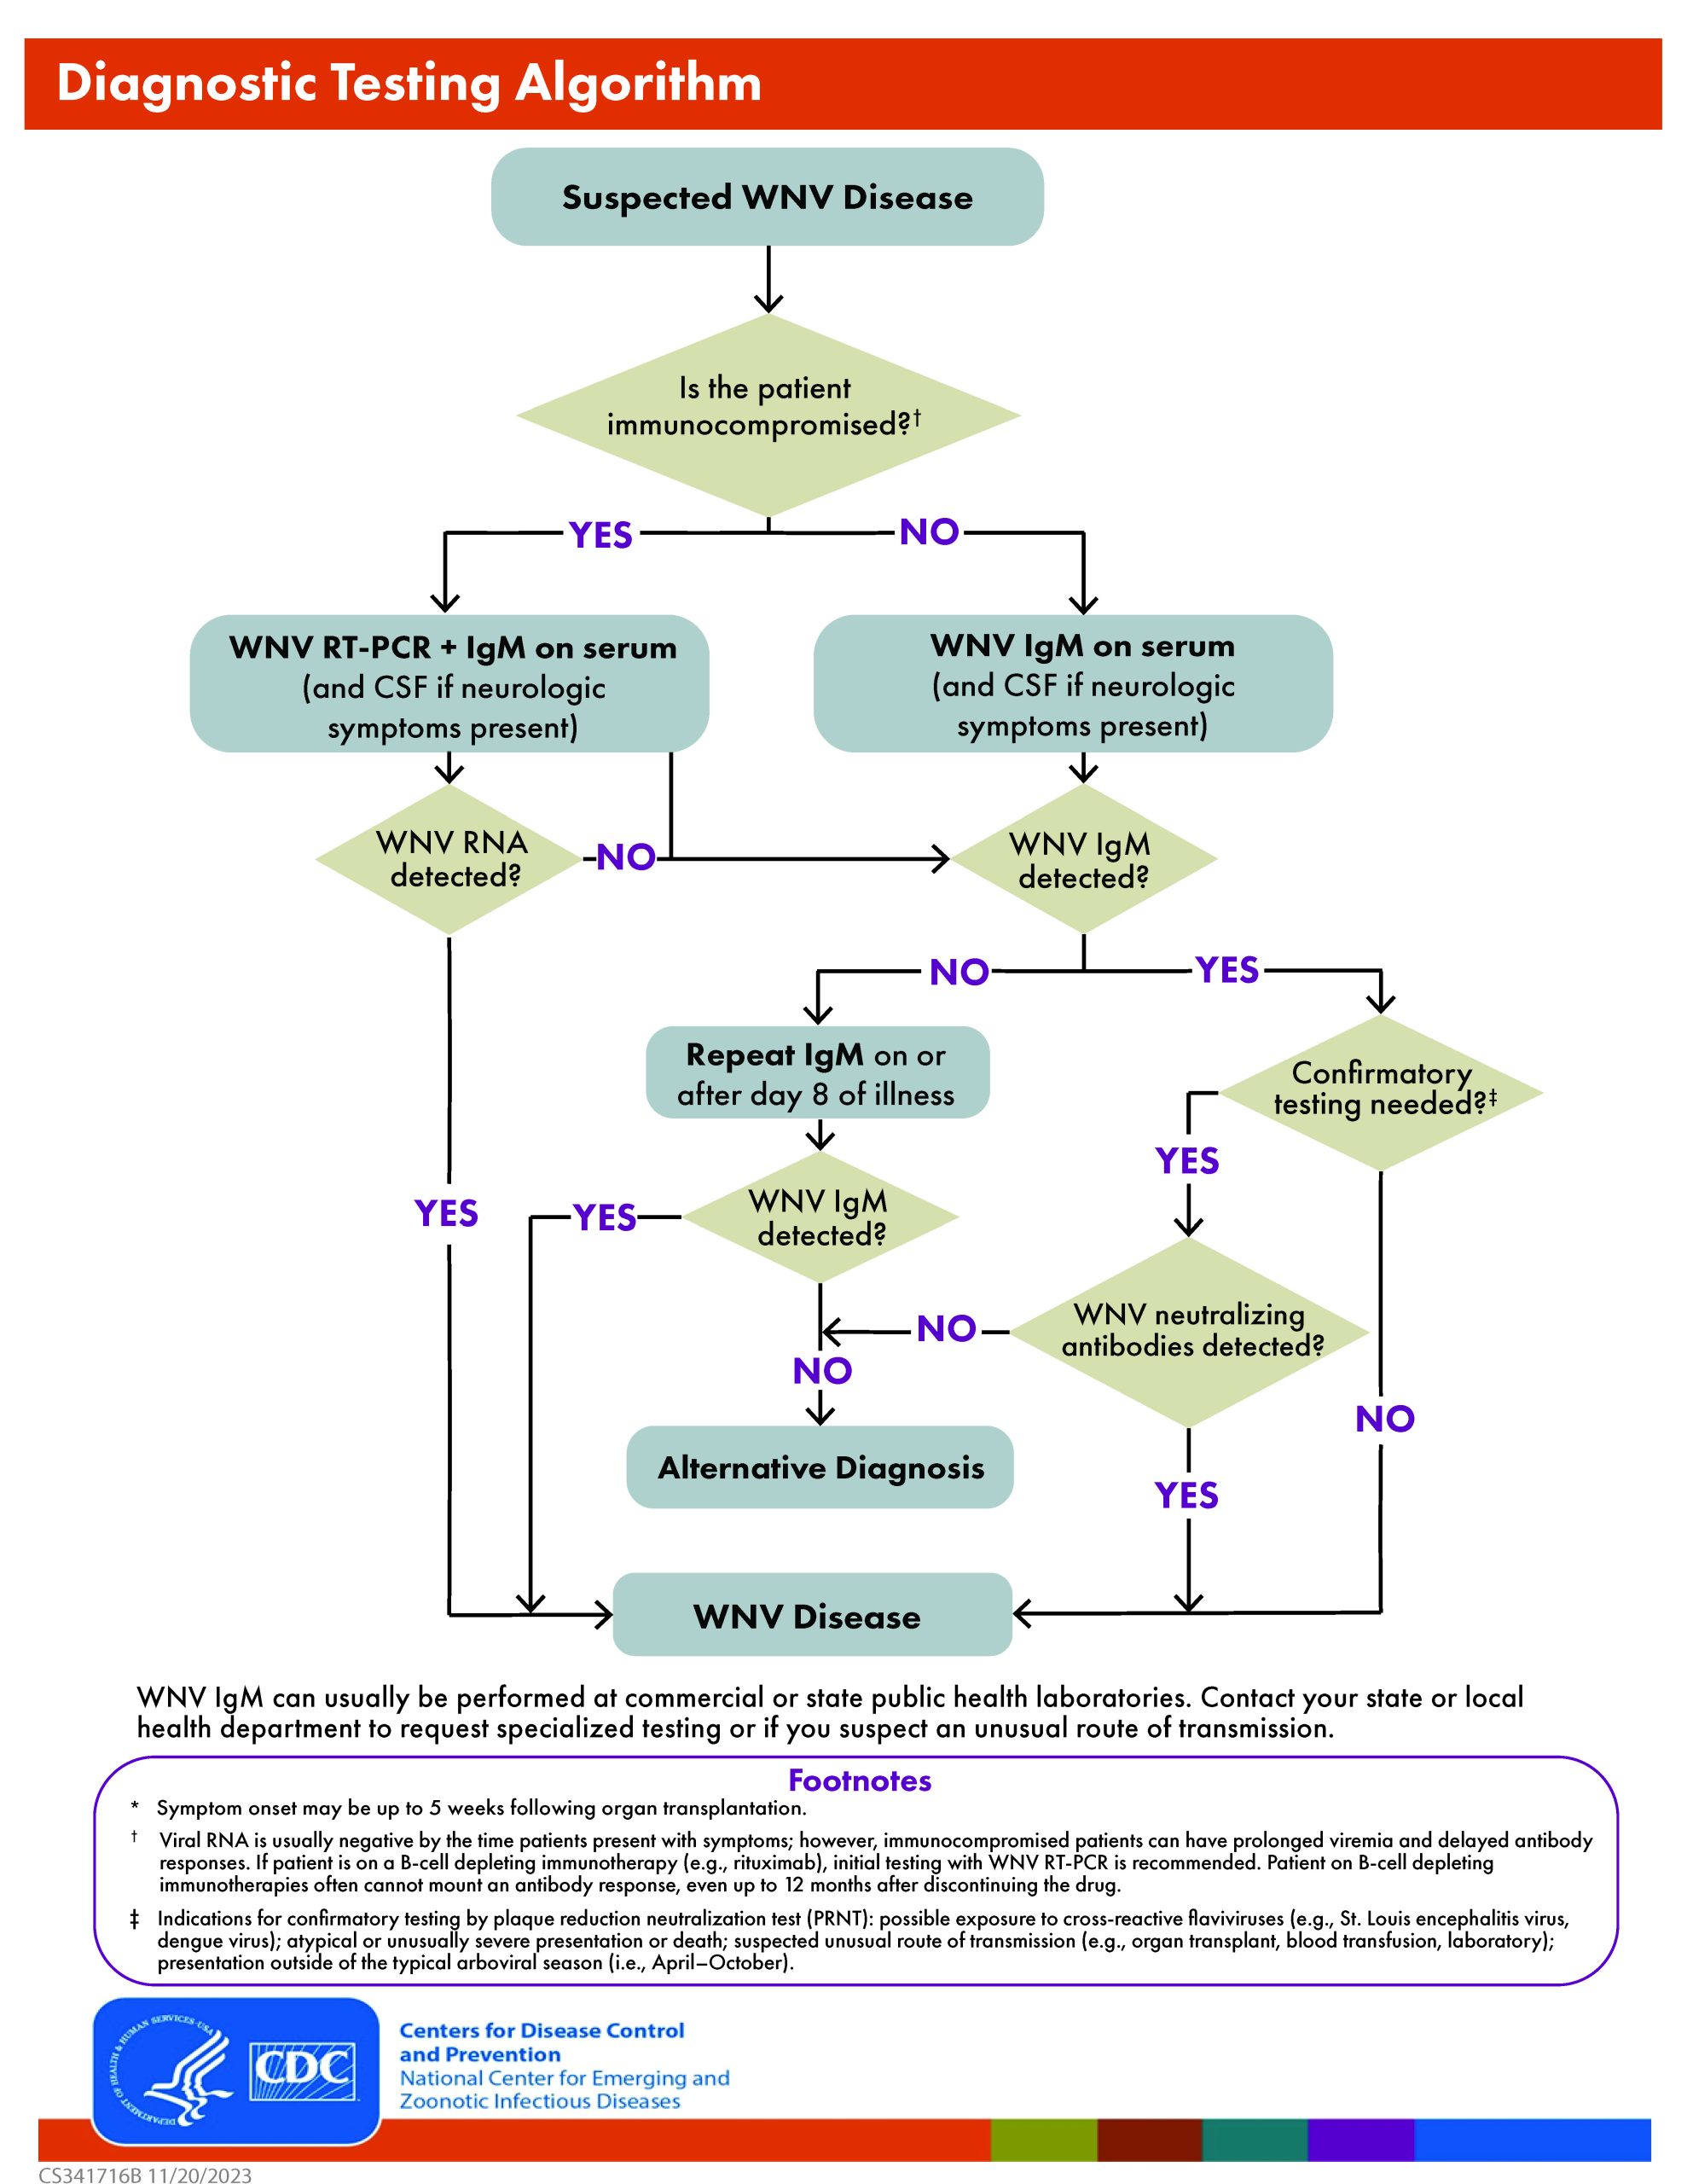 Image of a PDF flowchart that follows various pathways for suspected West Nile virus disease that ends in either an alternative diagnosis or West Nile virus disease. Several footnotes at the bottom.